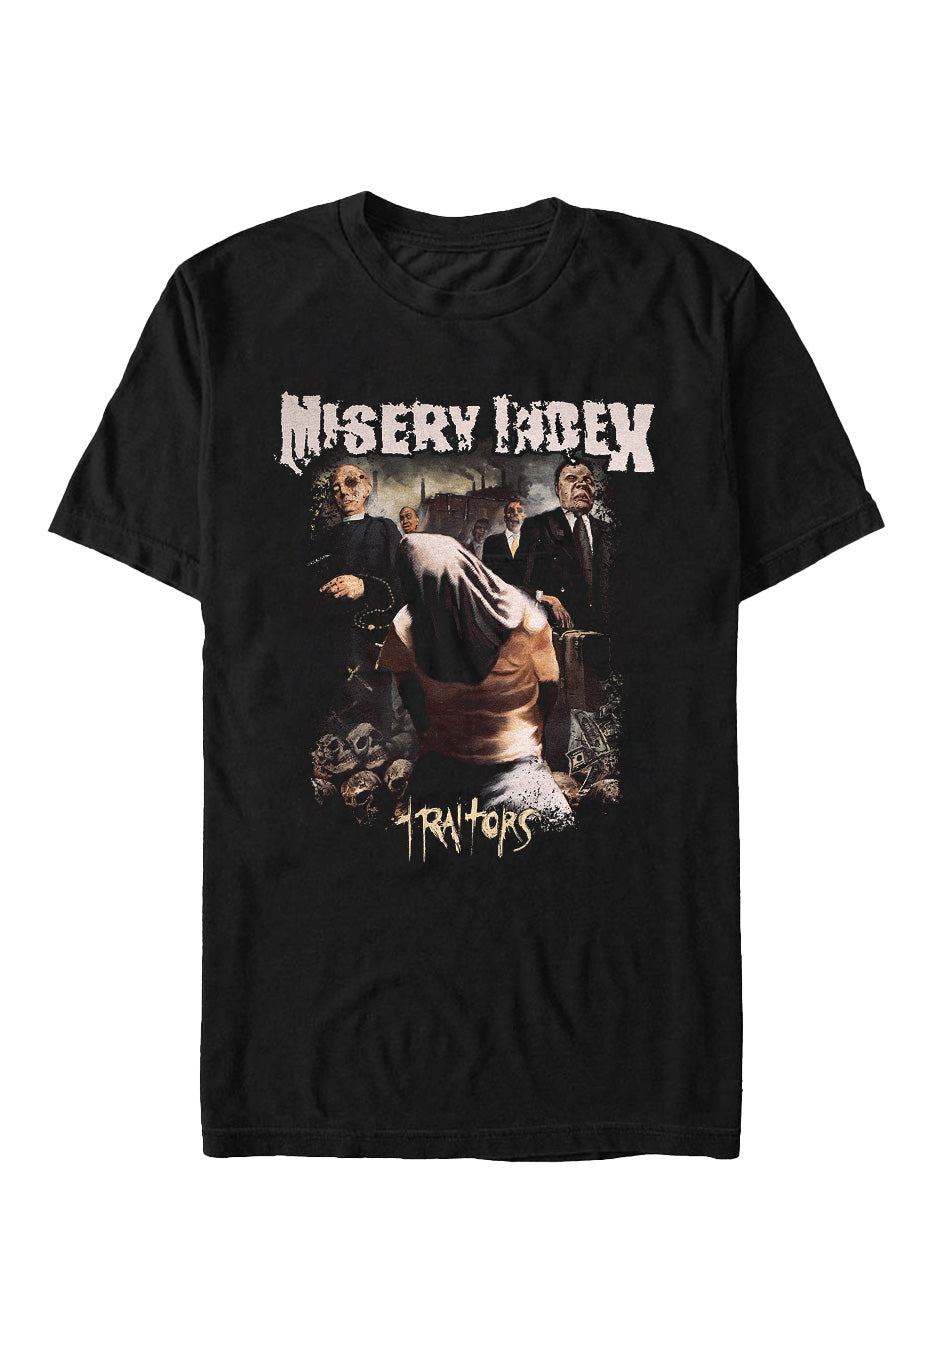 Misery Index - Traitors - T-Shirt | Neutral-Image